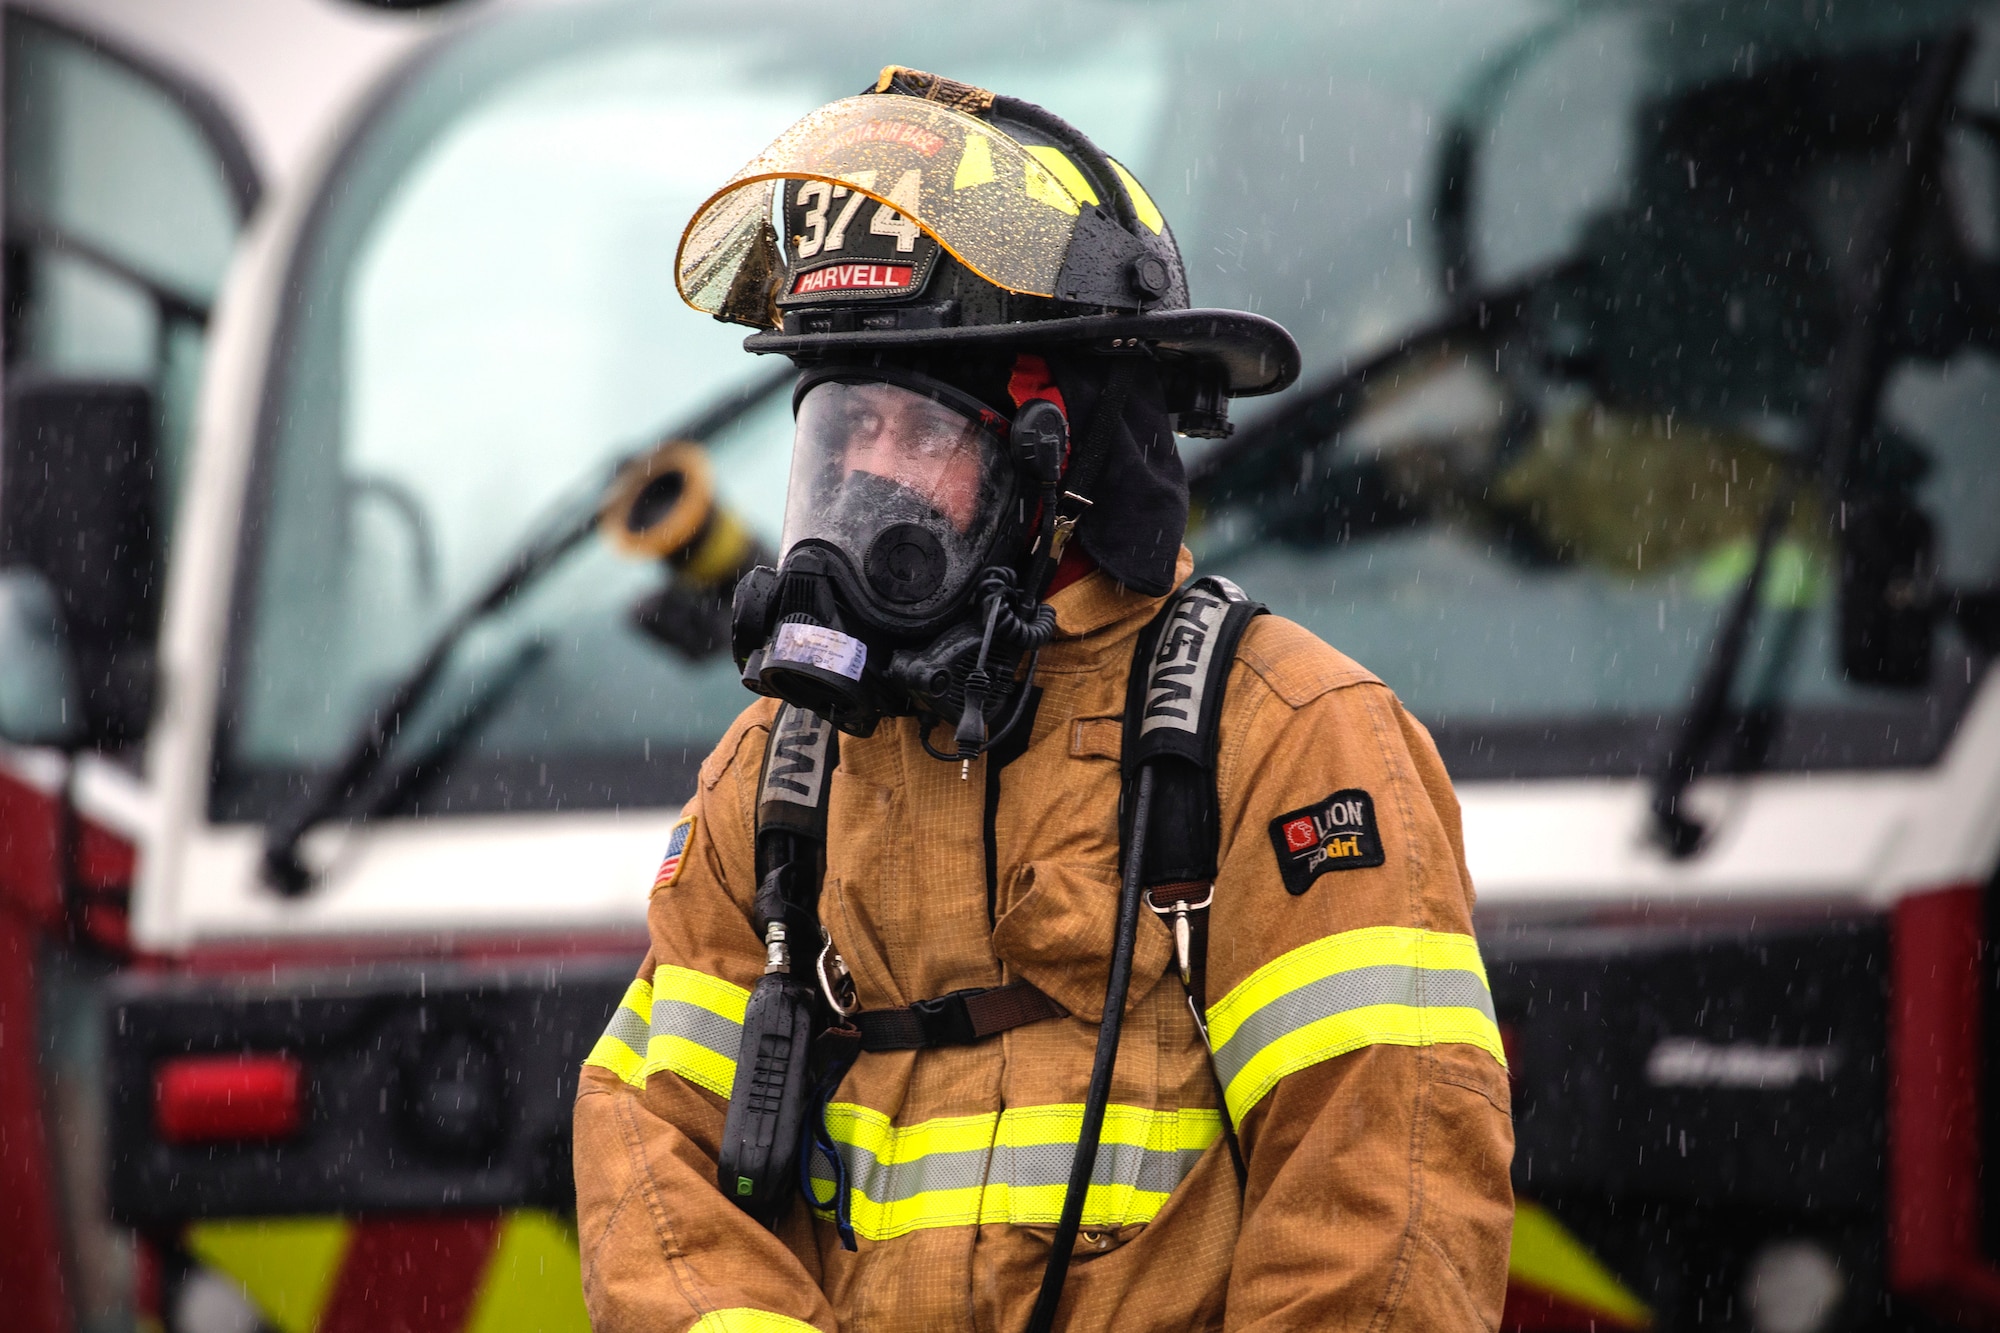 Senior Airman Alex Harvell, 374th Civil Engineer Squadron firefighter, stands in front of a fire truck after battling a simulated aircraft fire at Yokota Air Base